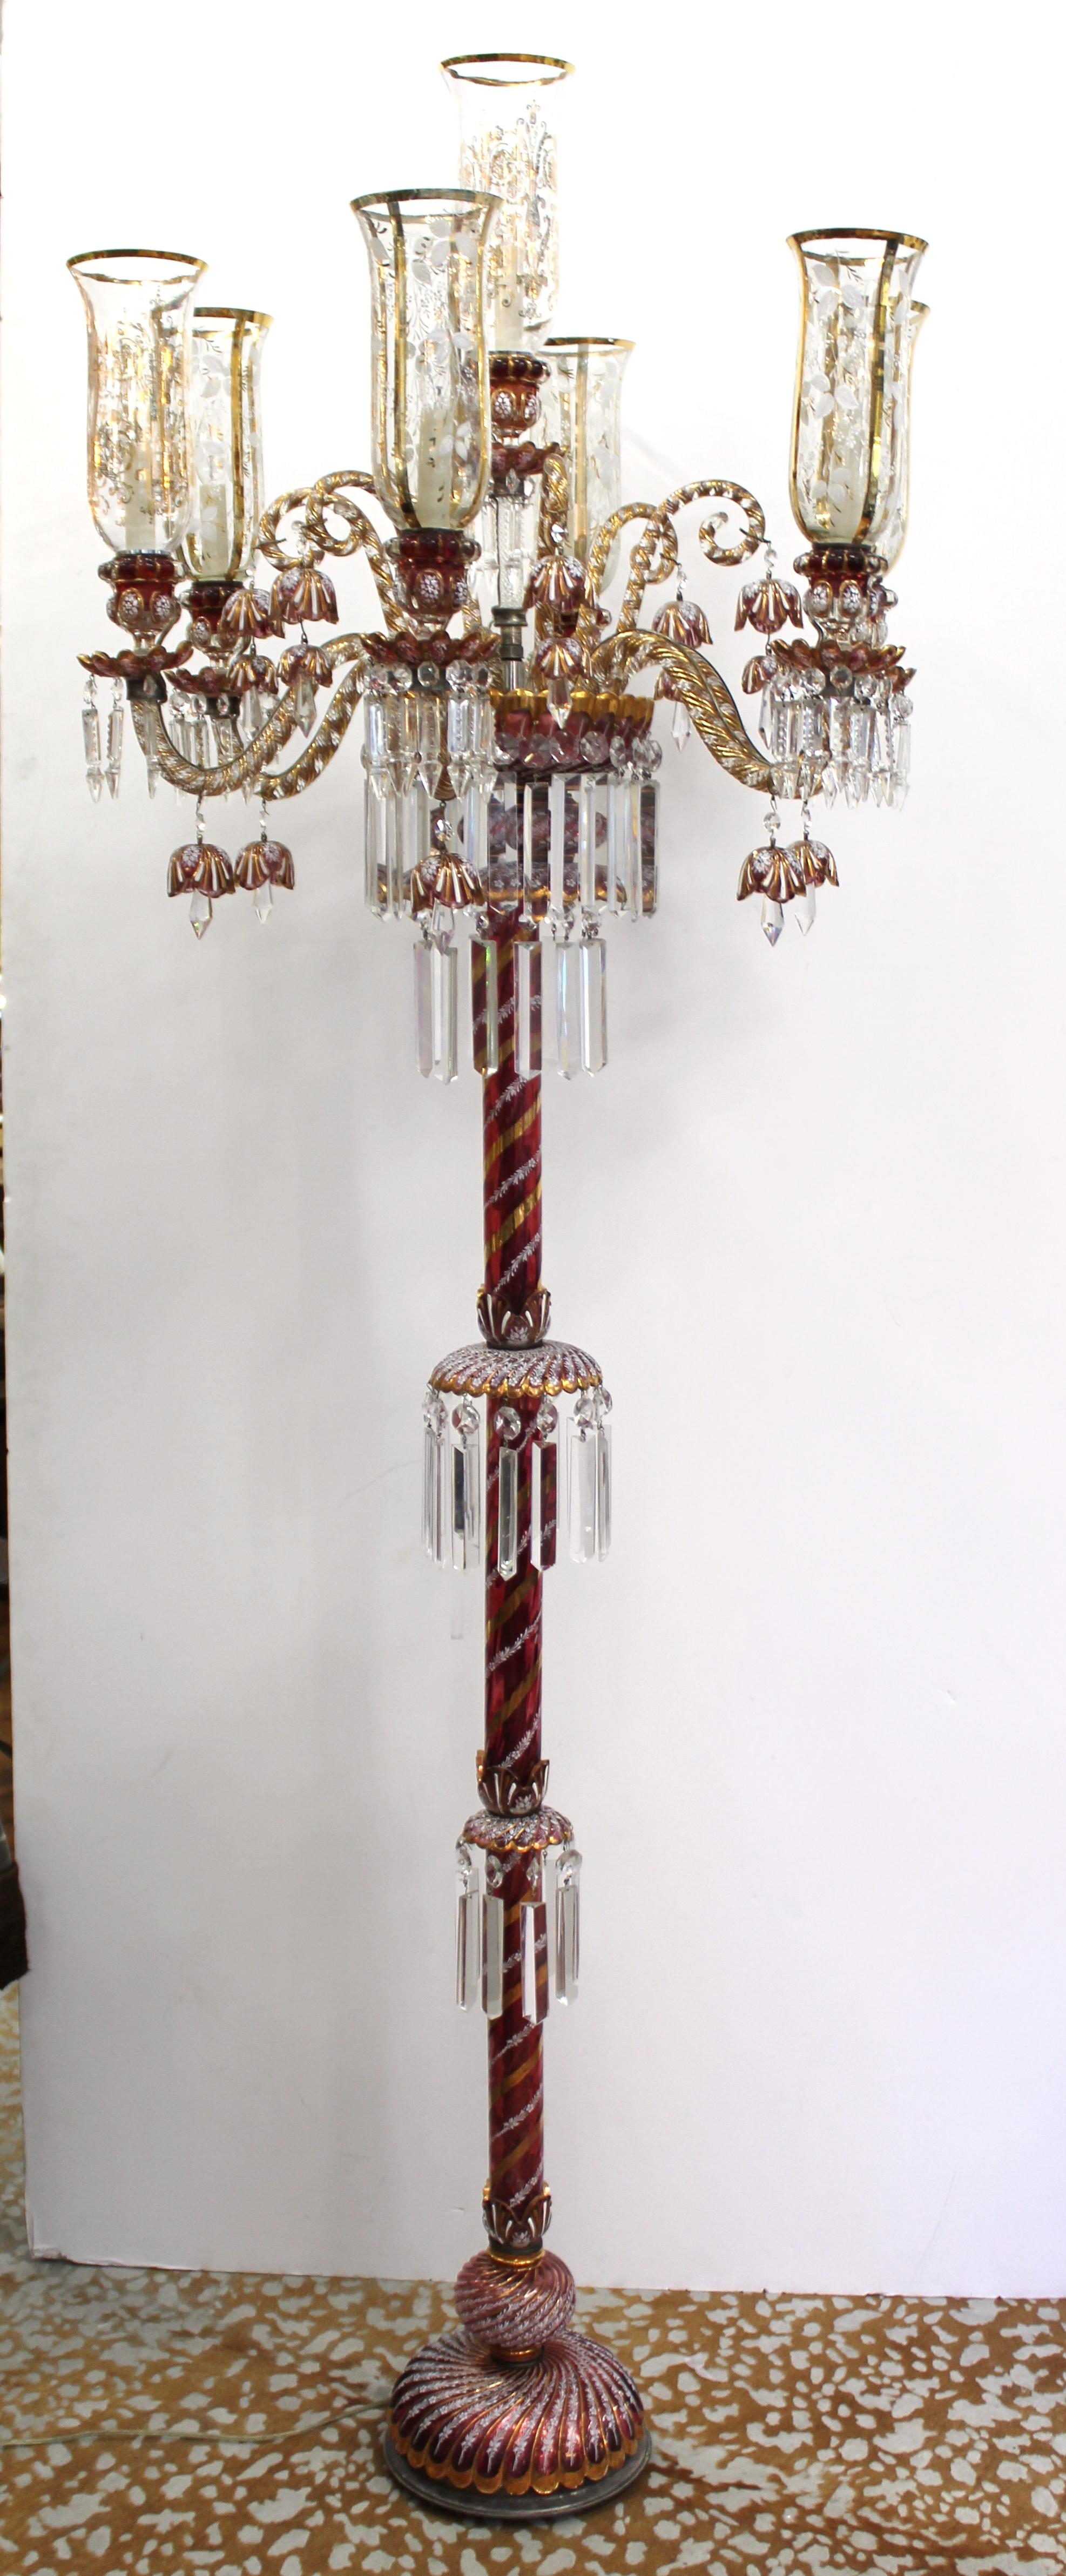 Victorian style pair of torchiere floor lamps designed in the style of Baccarat. The pair has crystal in a ruby finish and is decorated with enamel painted floral design and gilt elements as well as crystal drops. Each candle arm holds a decorated